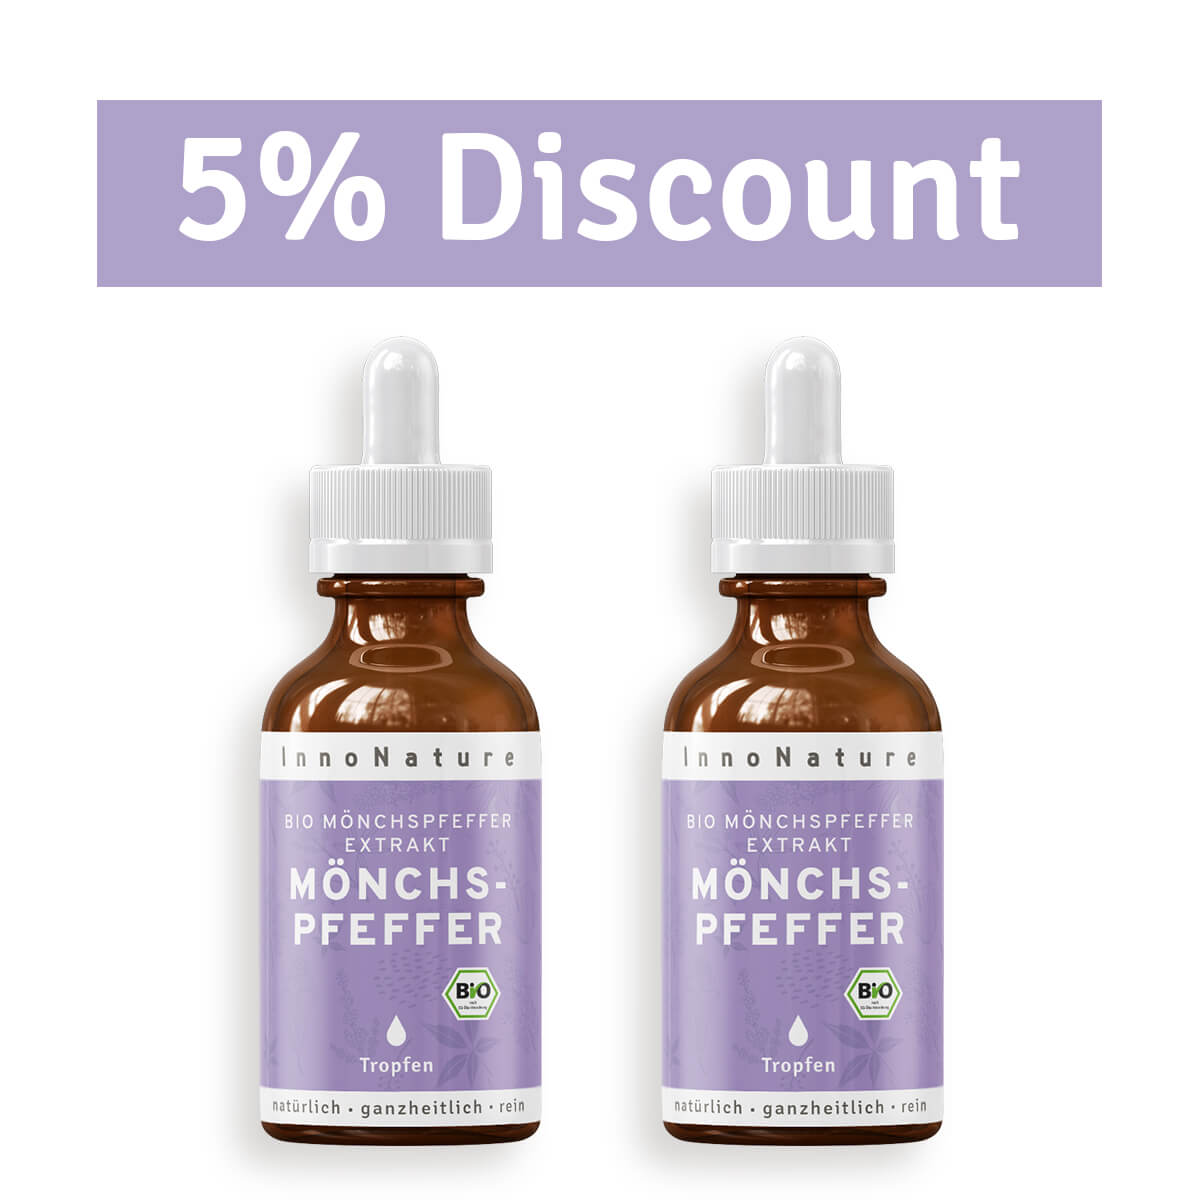 Organic Monk's Pepper Extract Drops